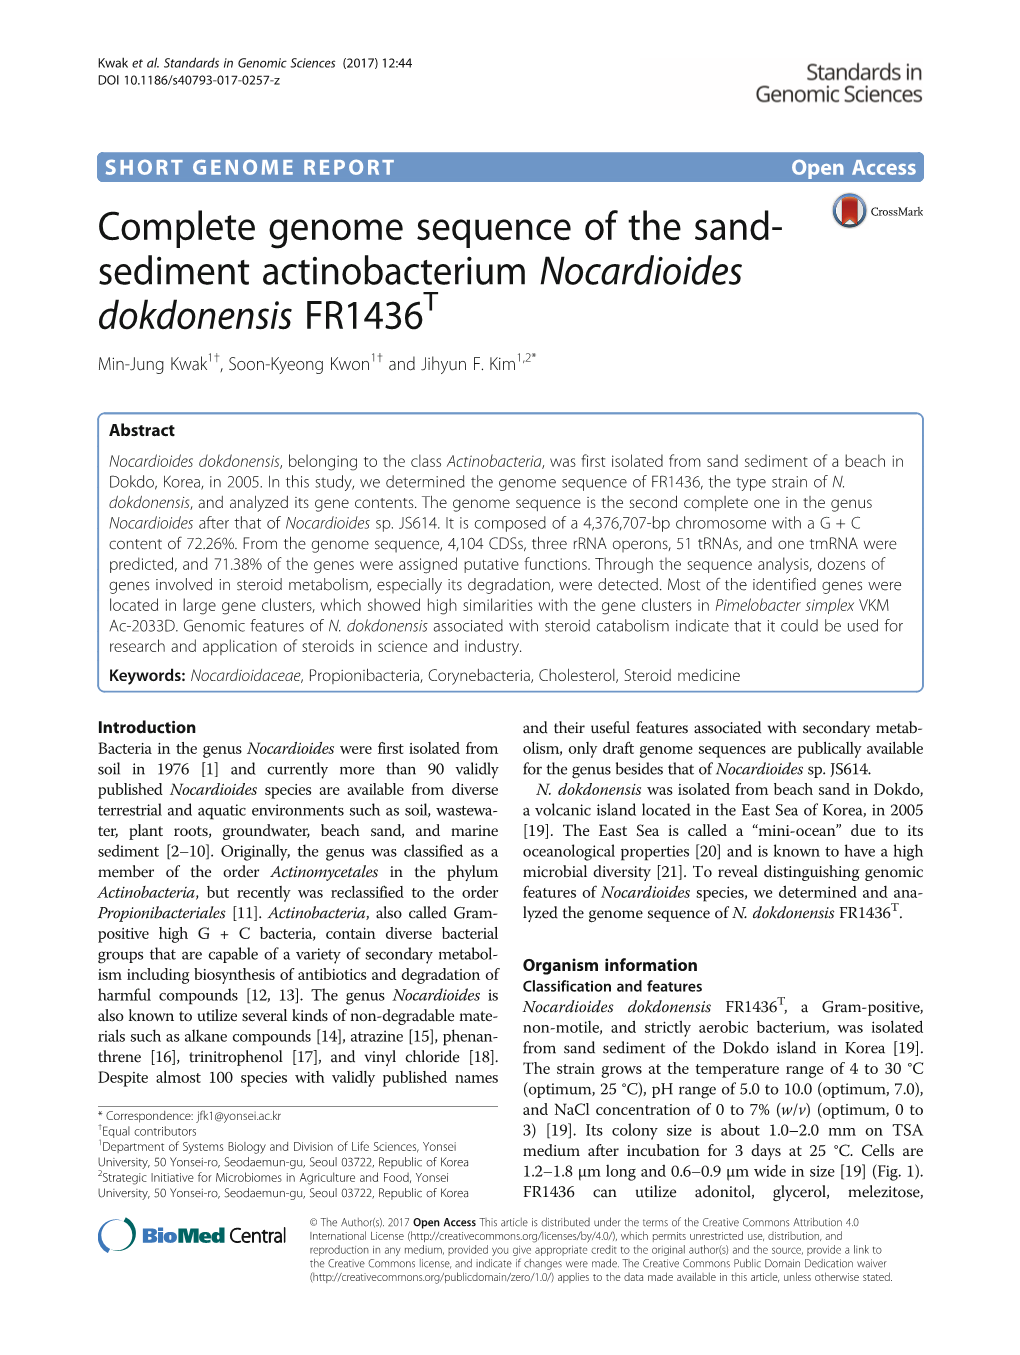 Complete Genome Sequence of the Sand-Sediment Actinobacterium